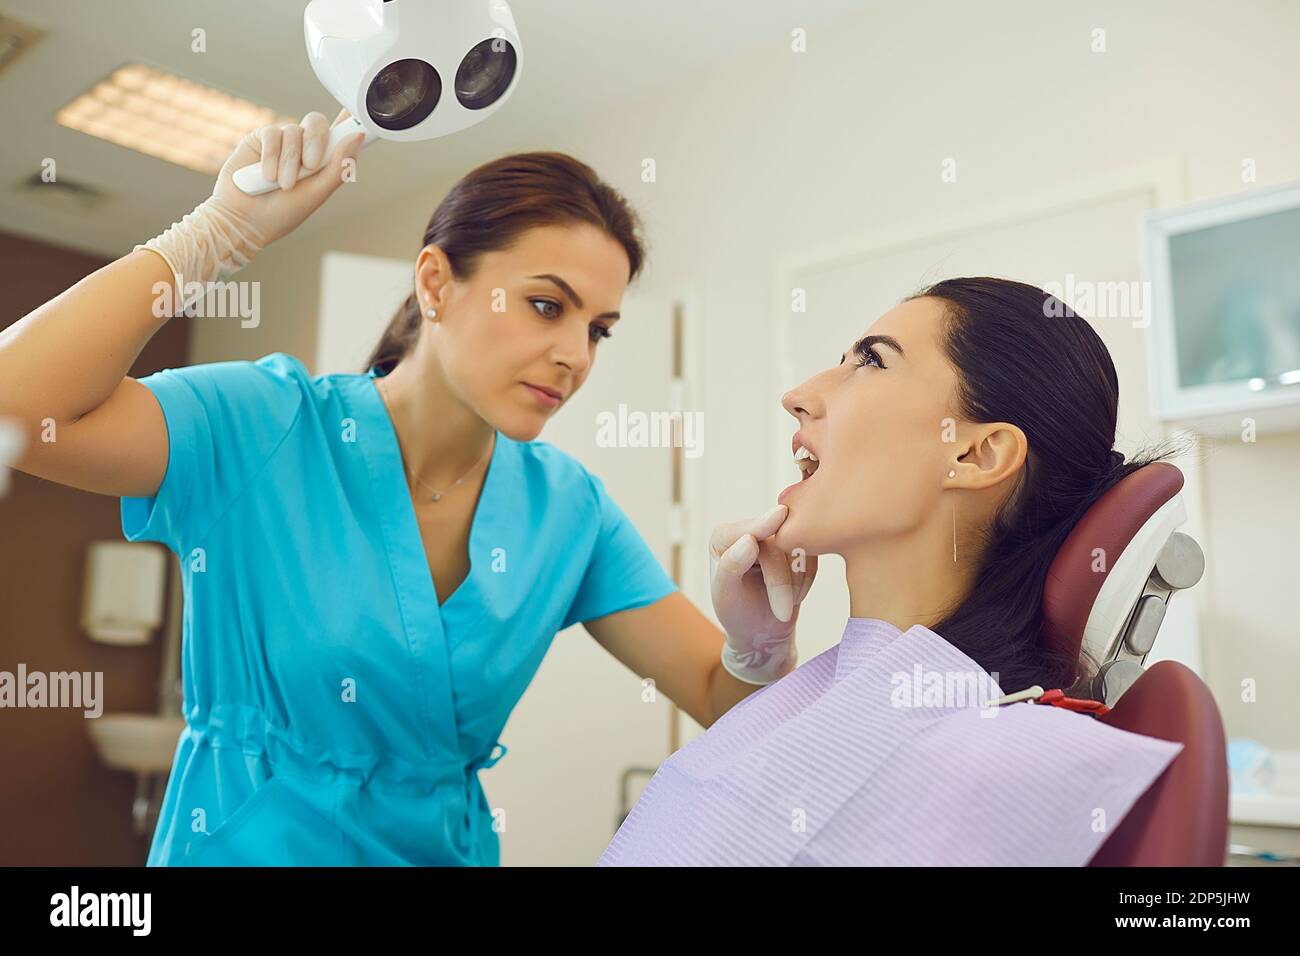 Dentist in medical uniform directing light to woman patients mouth for examination Stock Photo